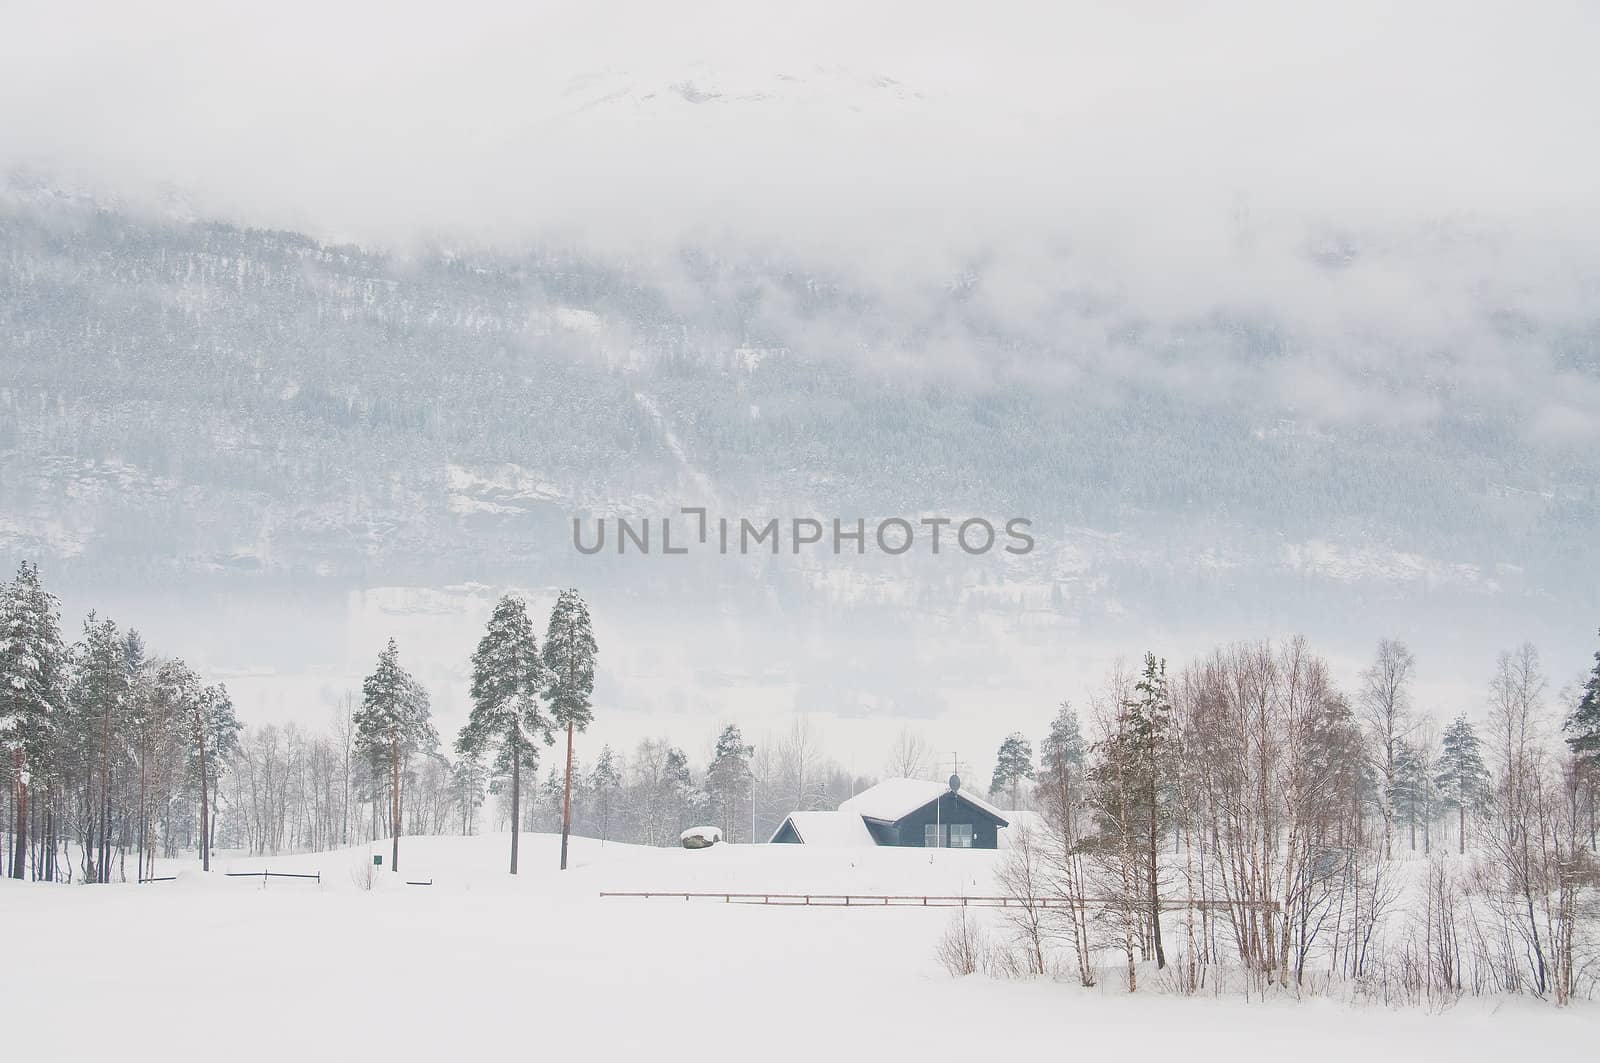 A small house in the mountains.  Winter, trees, snow and fog